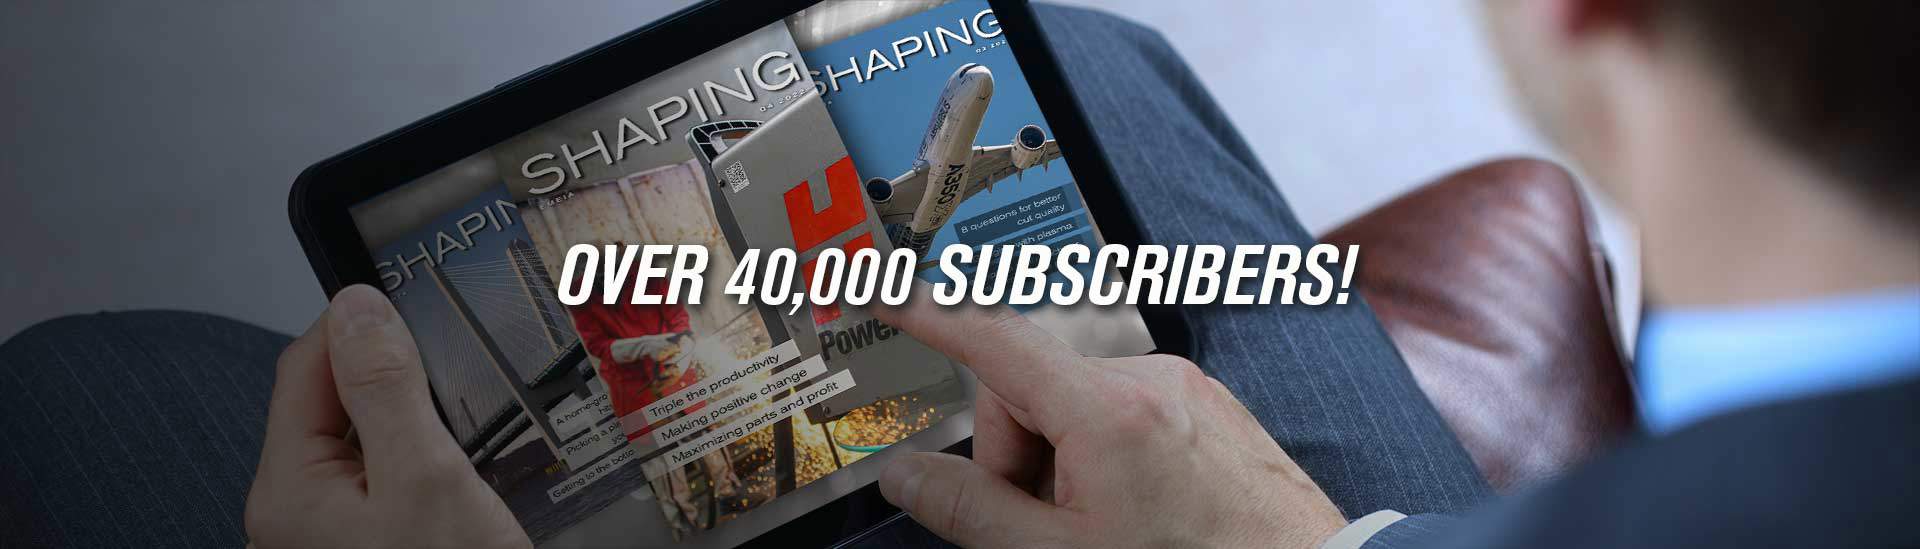 Over 40,000 subscribers